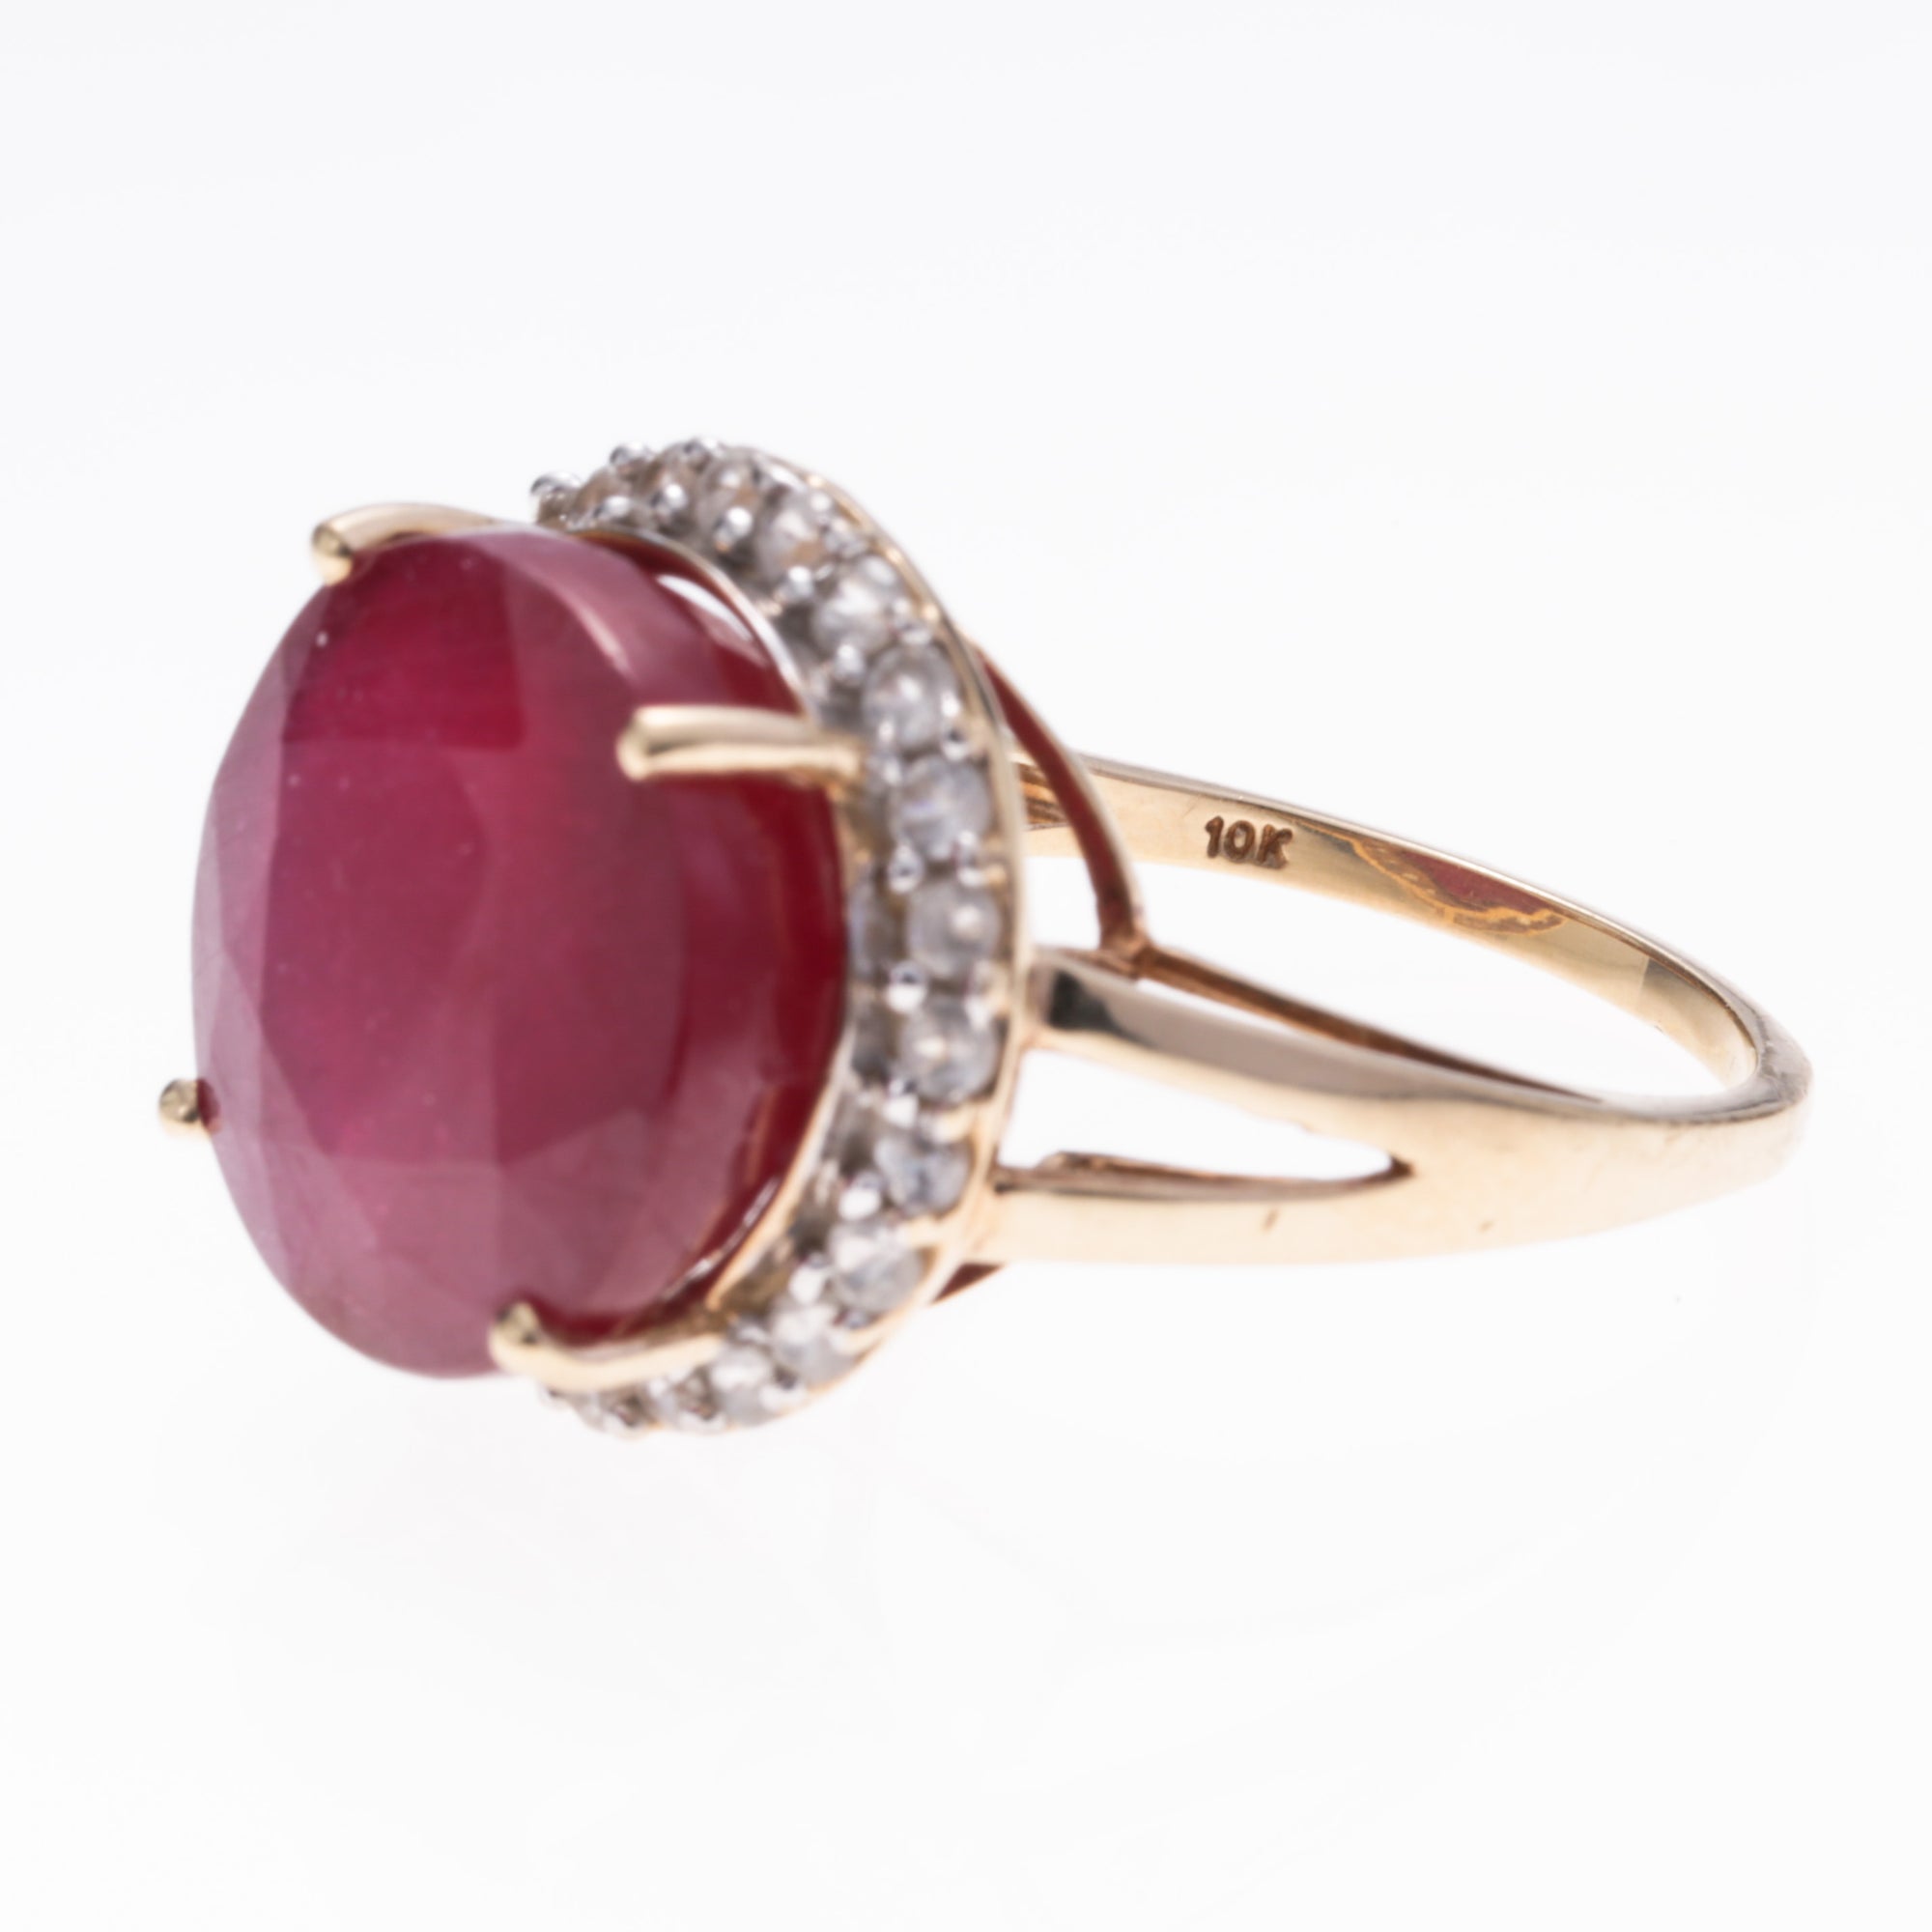 10K Yellow Gold Synthetic Ruby and White Topaz Ring | 11.35ct, 0.23ctw | SZ 6.75